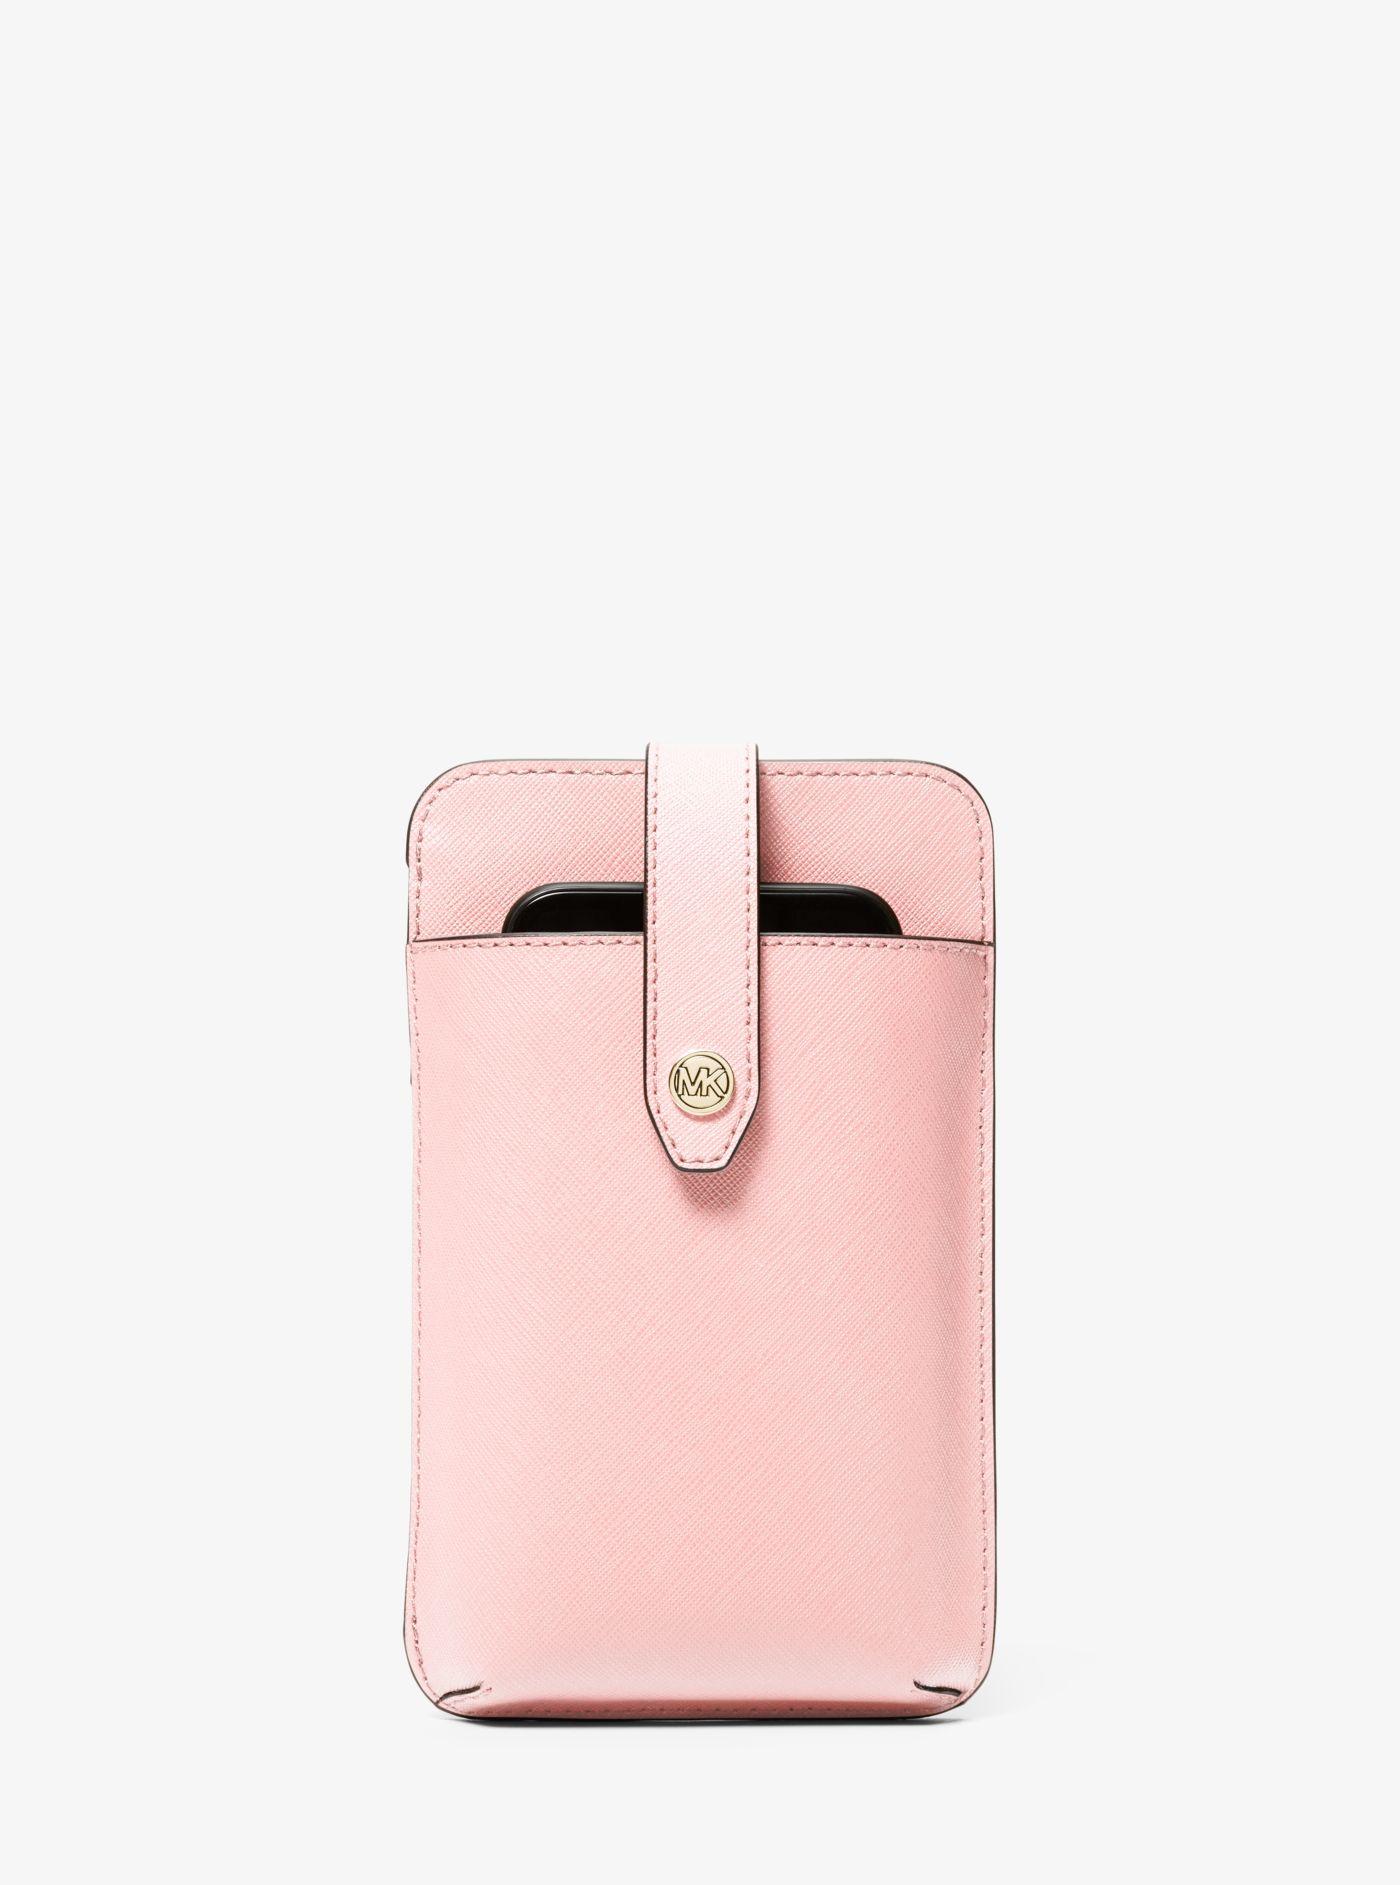 Michael Kors Saffiano Leather Smartphone Crossbody Bag in Pink | Lyst